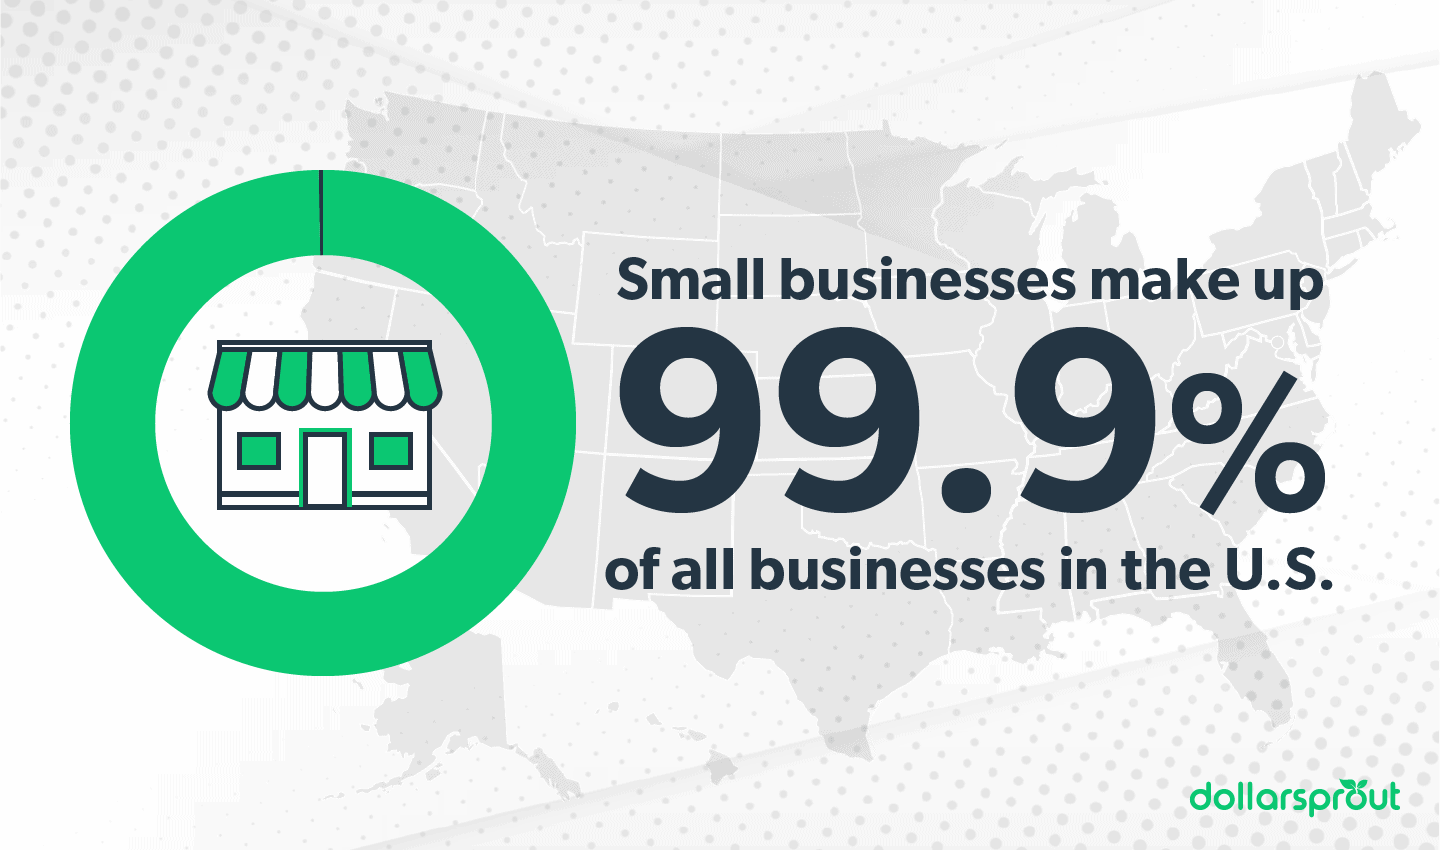 Percent of small businesses in US